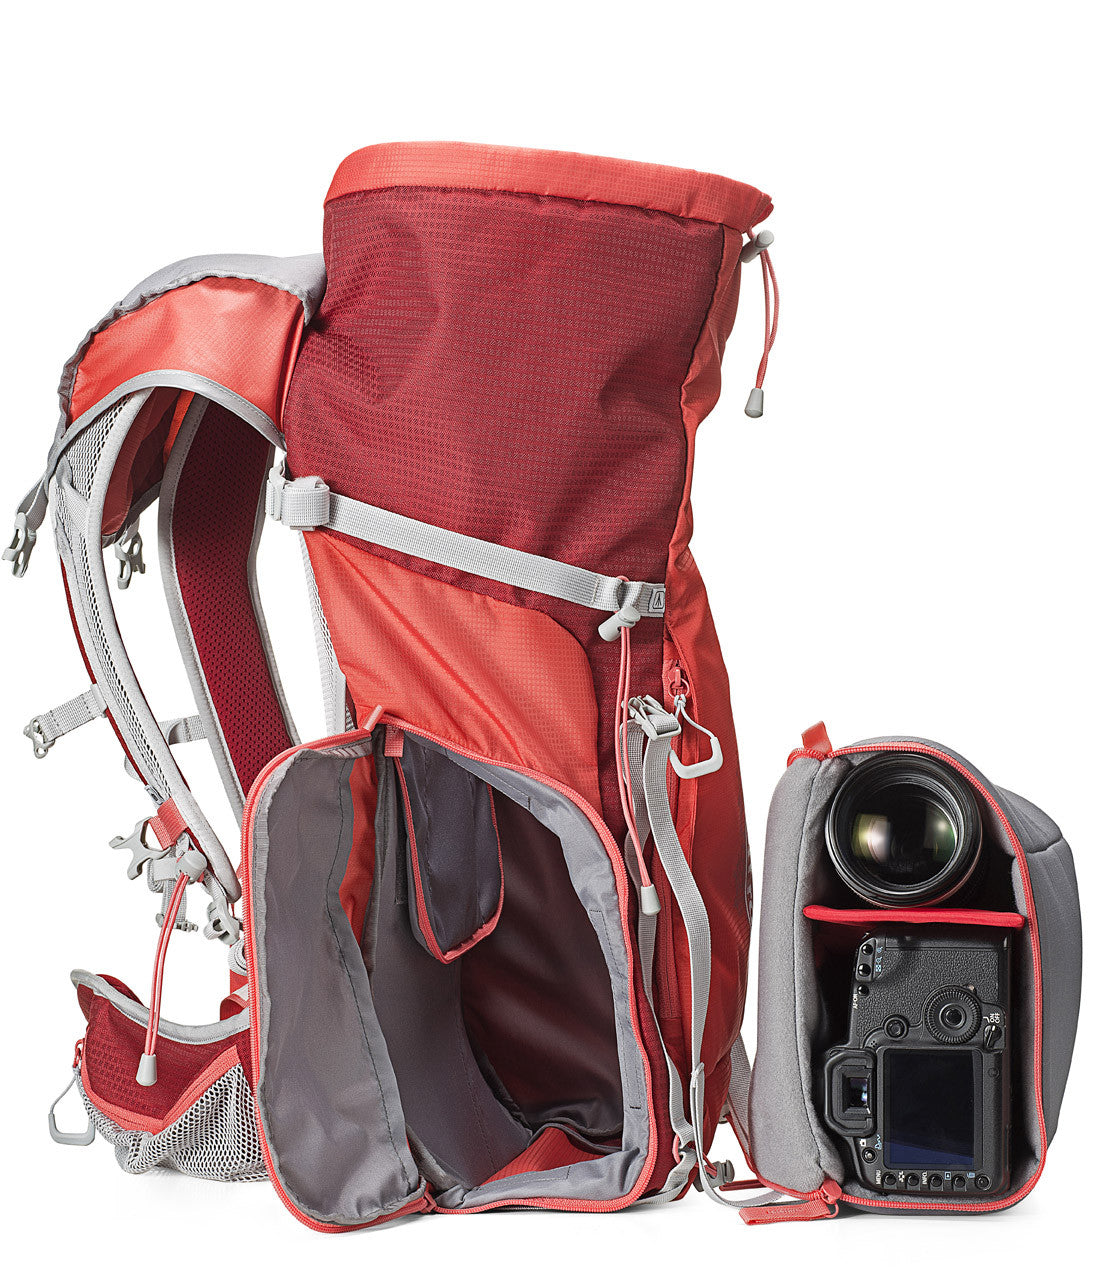 Manfrotto Off Road Hiking Backpack Red, bags backpacks, Manfrotto - Pictureline  - 5